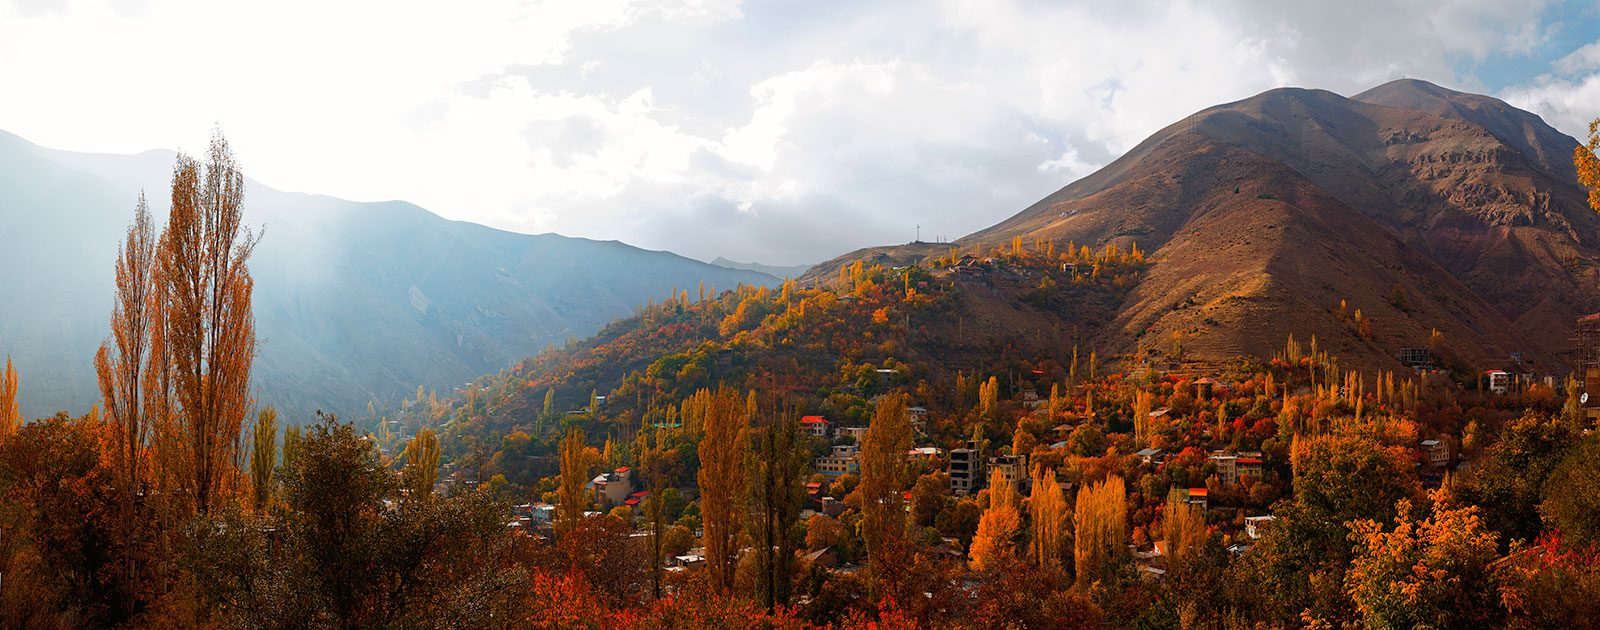 Panoramic view of colorful village composed of 9 exposures right to left by Tokina opera 50mm F1.4 FF at f/5.6 on Nikon D610 body at ISO50. Meygun, Iran.